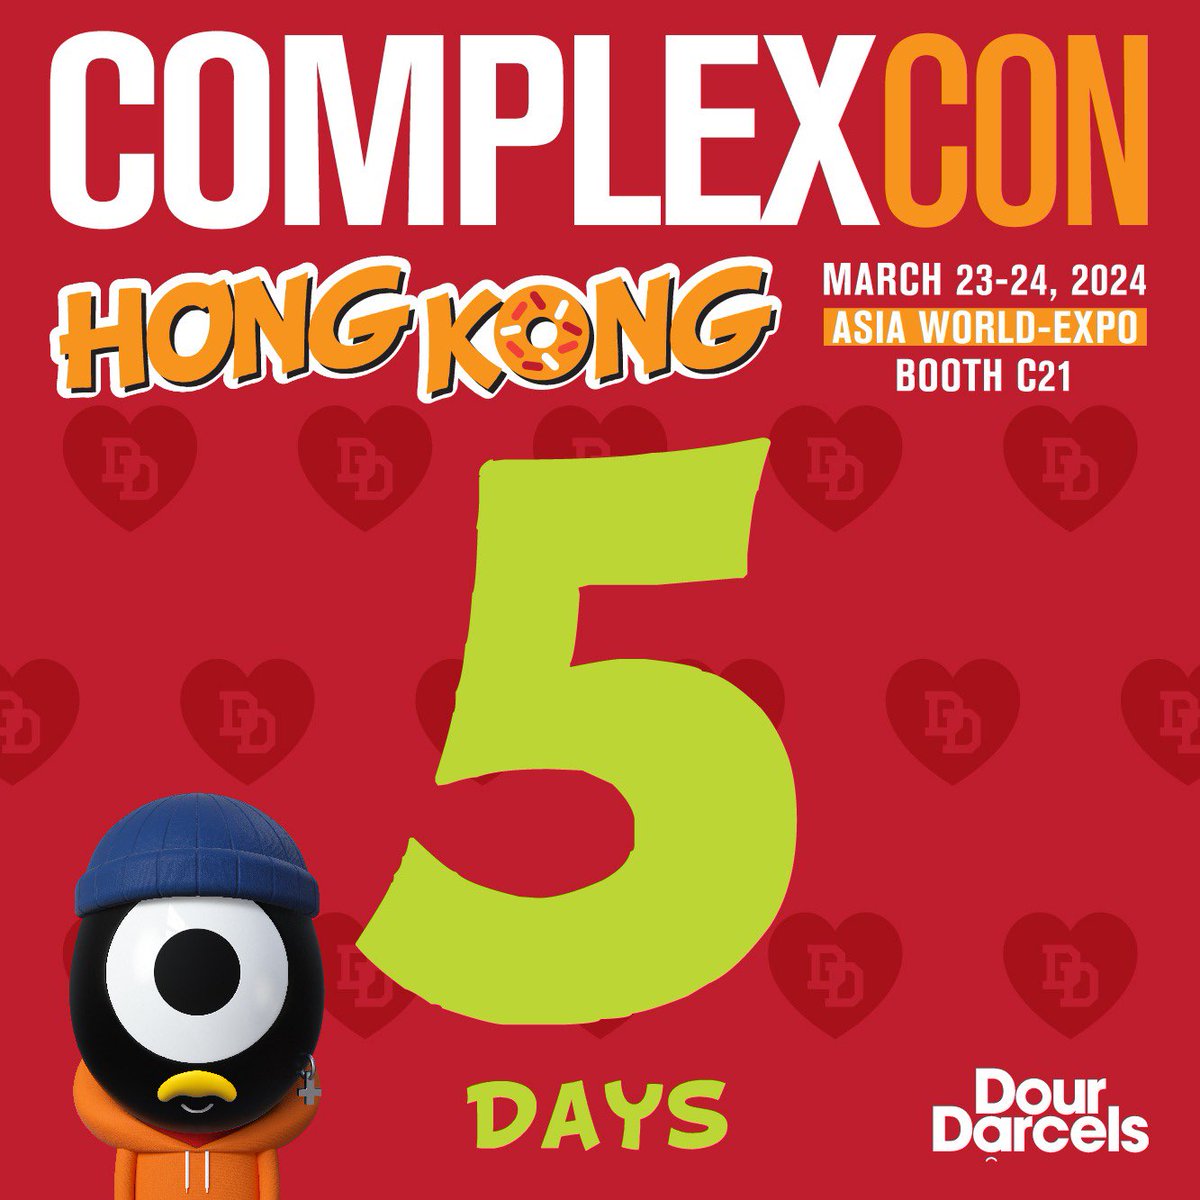 5 days till we hit @ComplexCon Hong Kong!! We'd love to see as many DD Holders in attendance as possible!! LFG!! 🔥